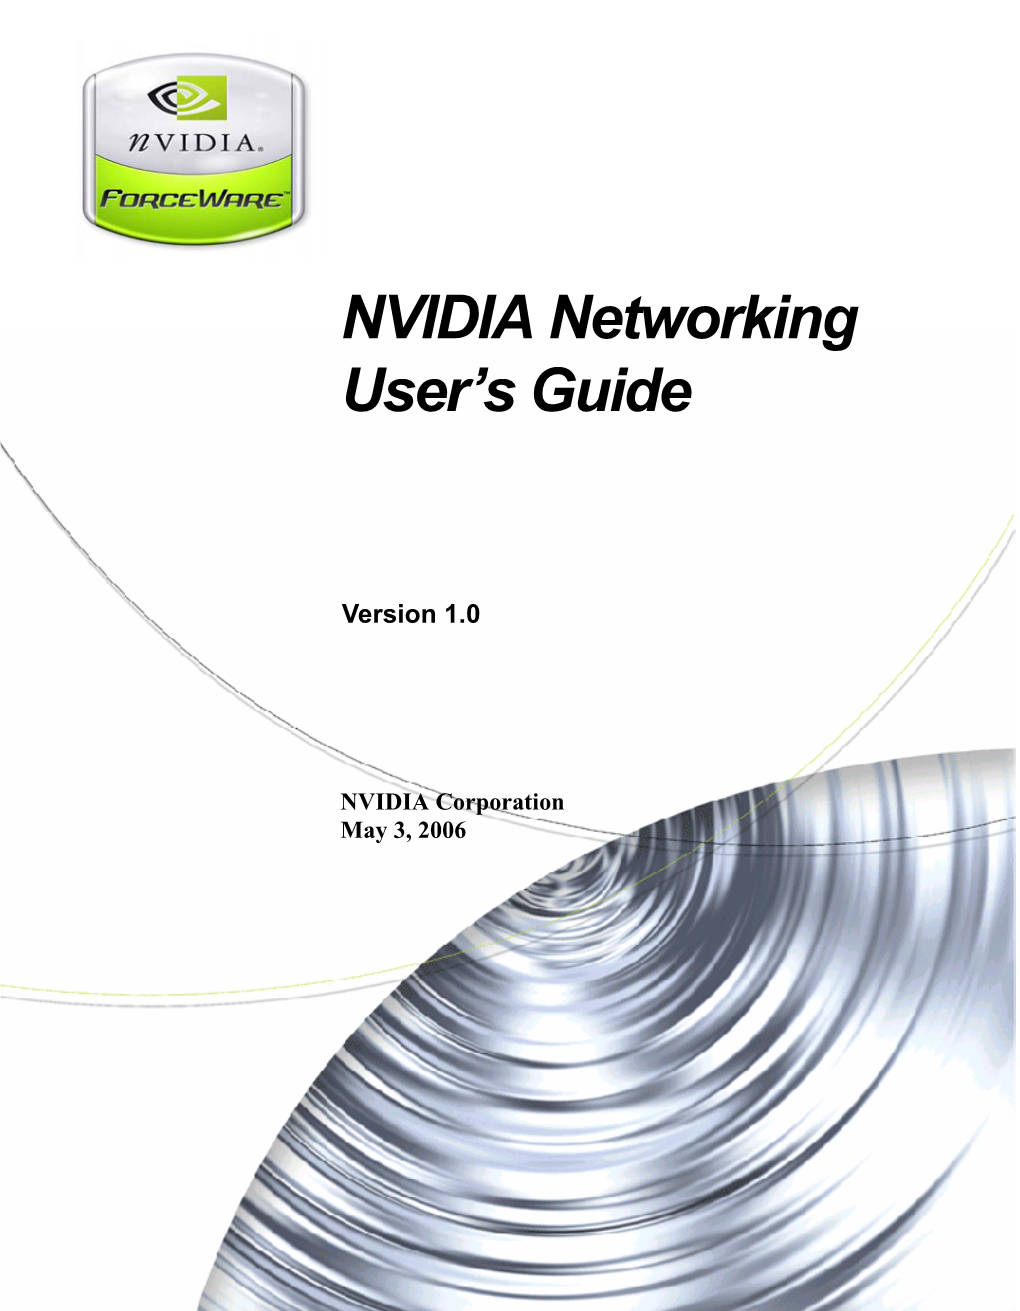 NVIDIA Networking User's Guide